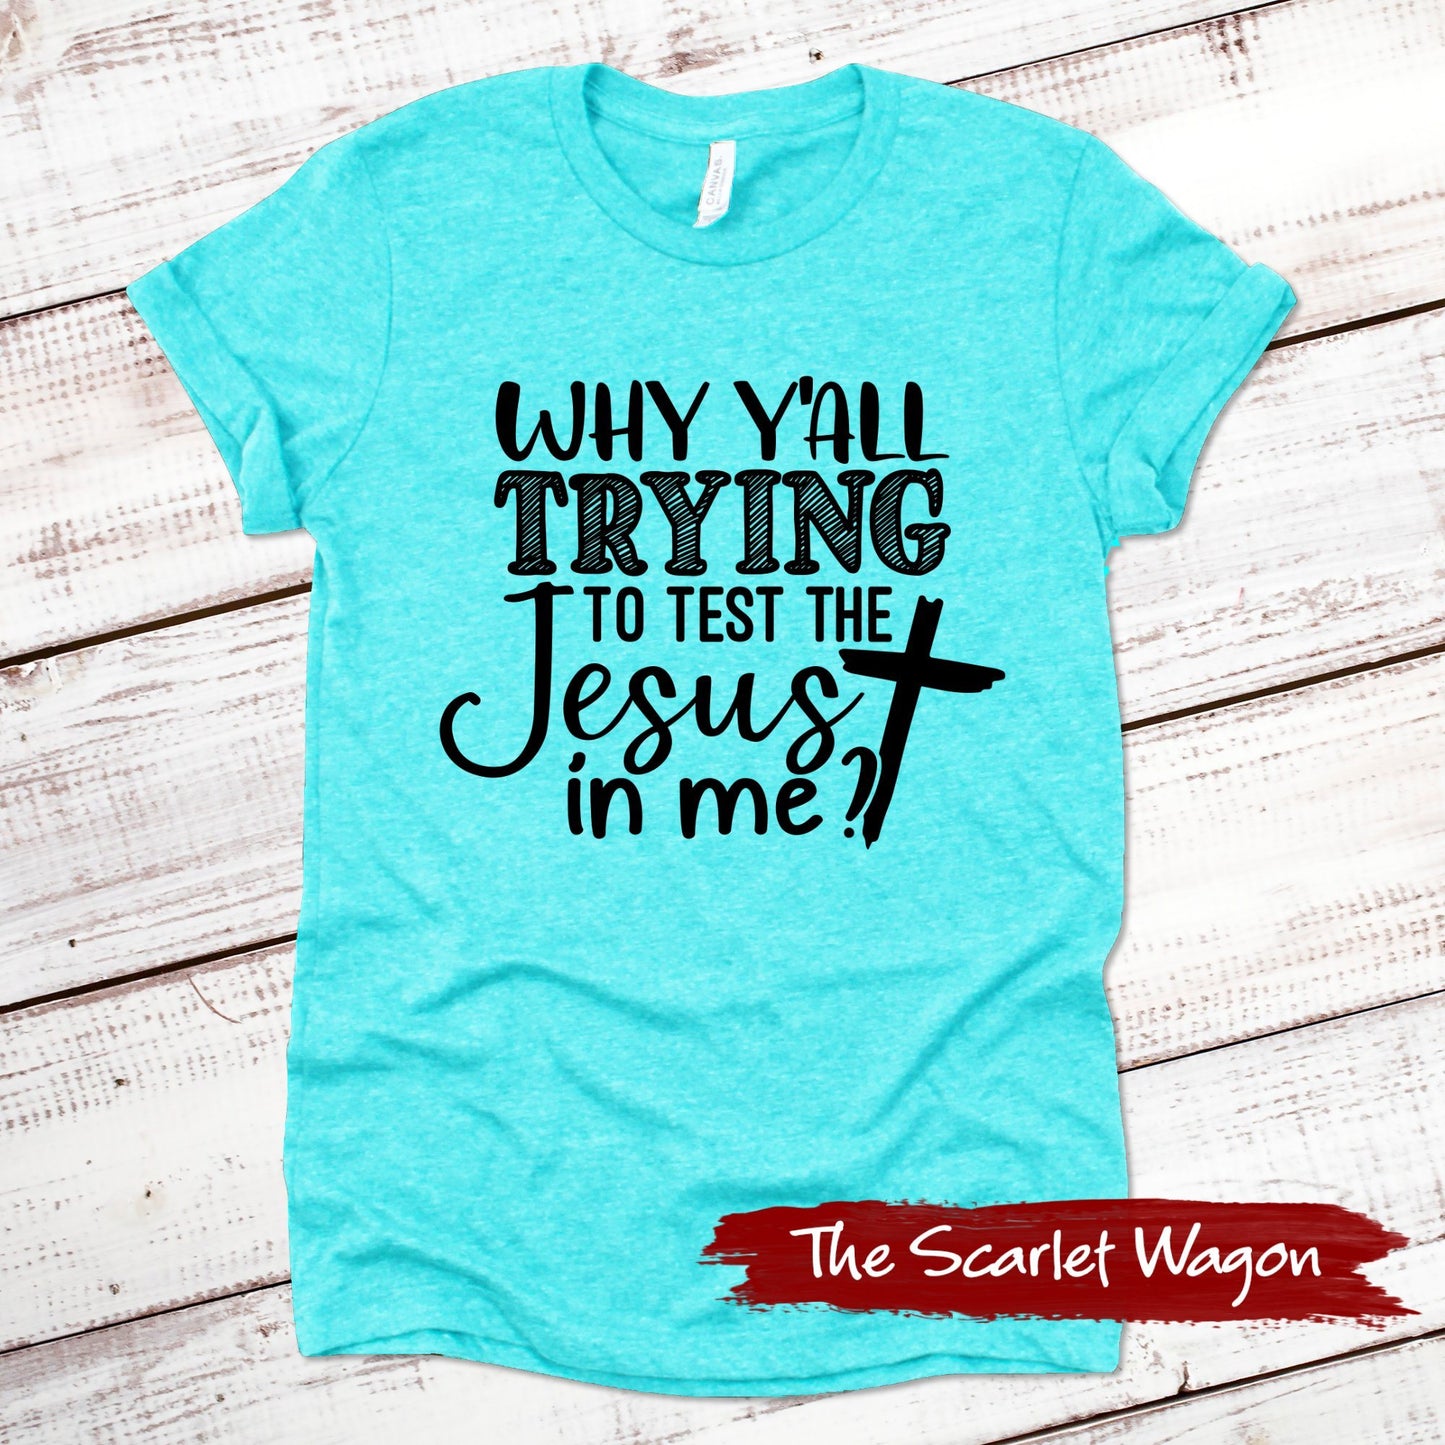 Why Y'all Trying to Test the Jesus in Me Funny Shirt Scarlet Wagon Heather Teal XS 